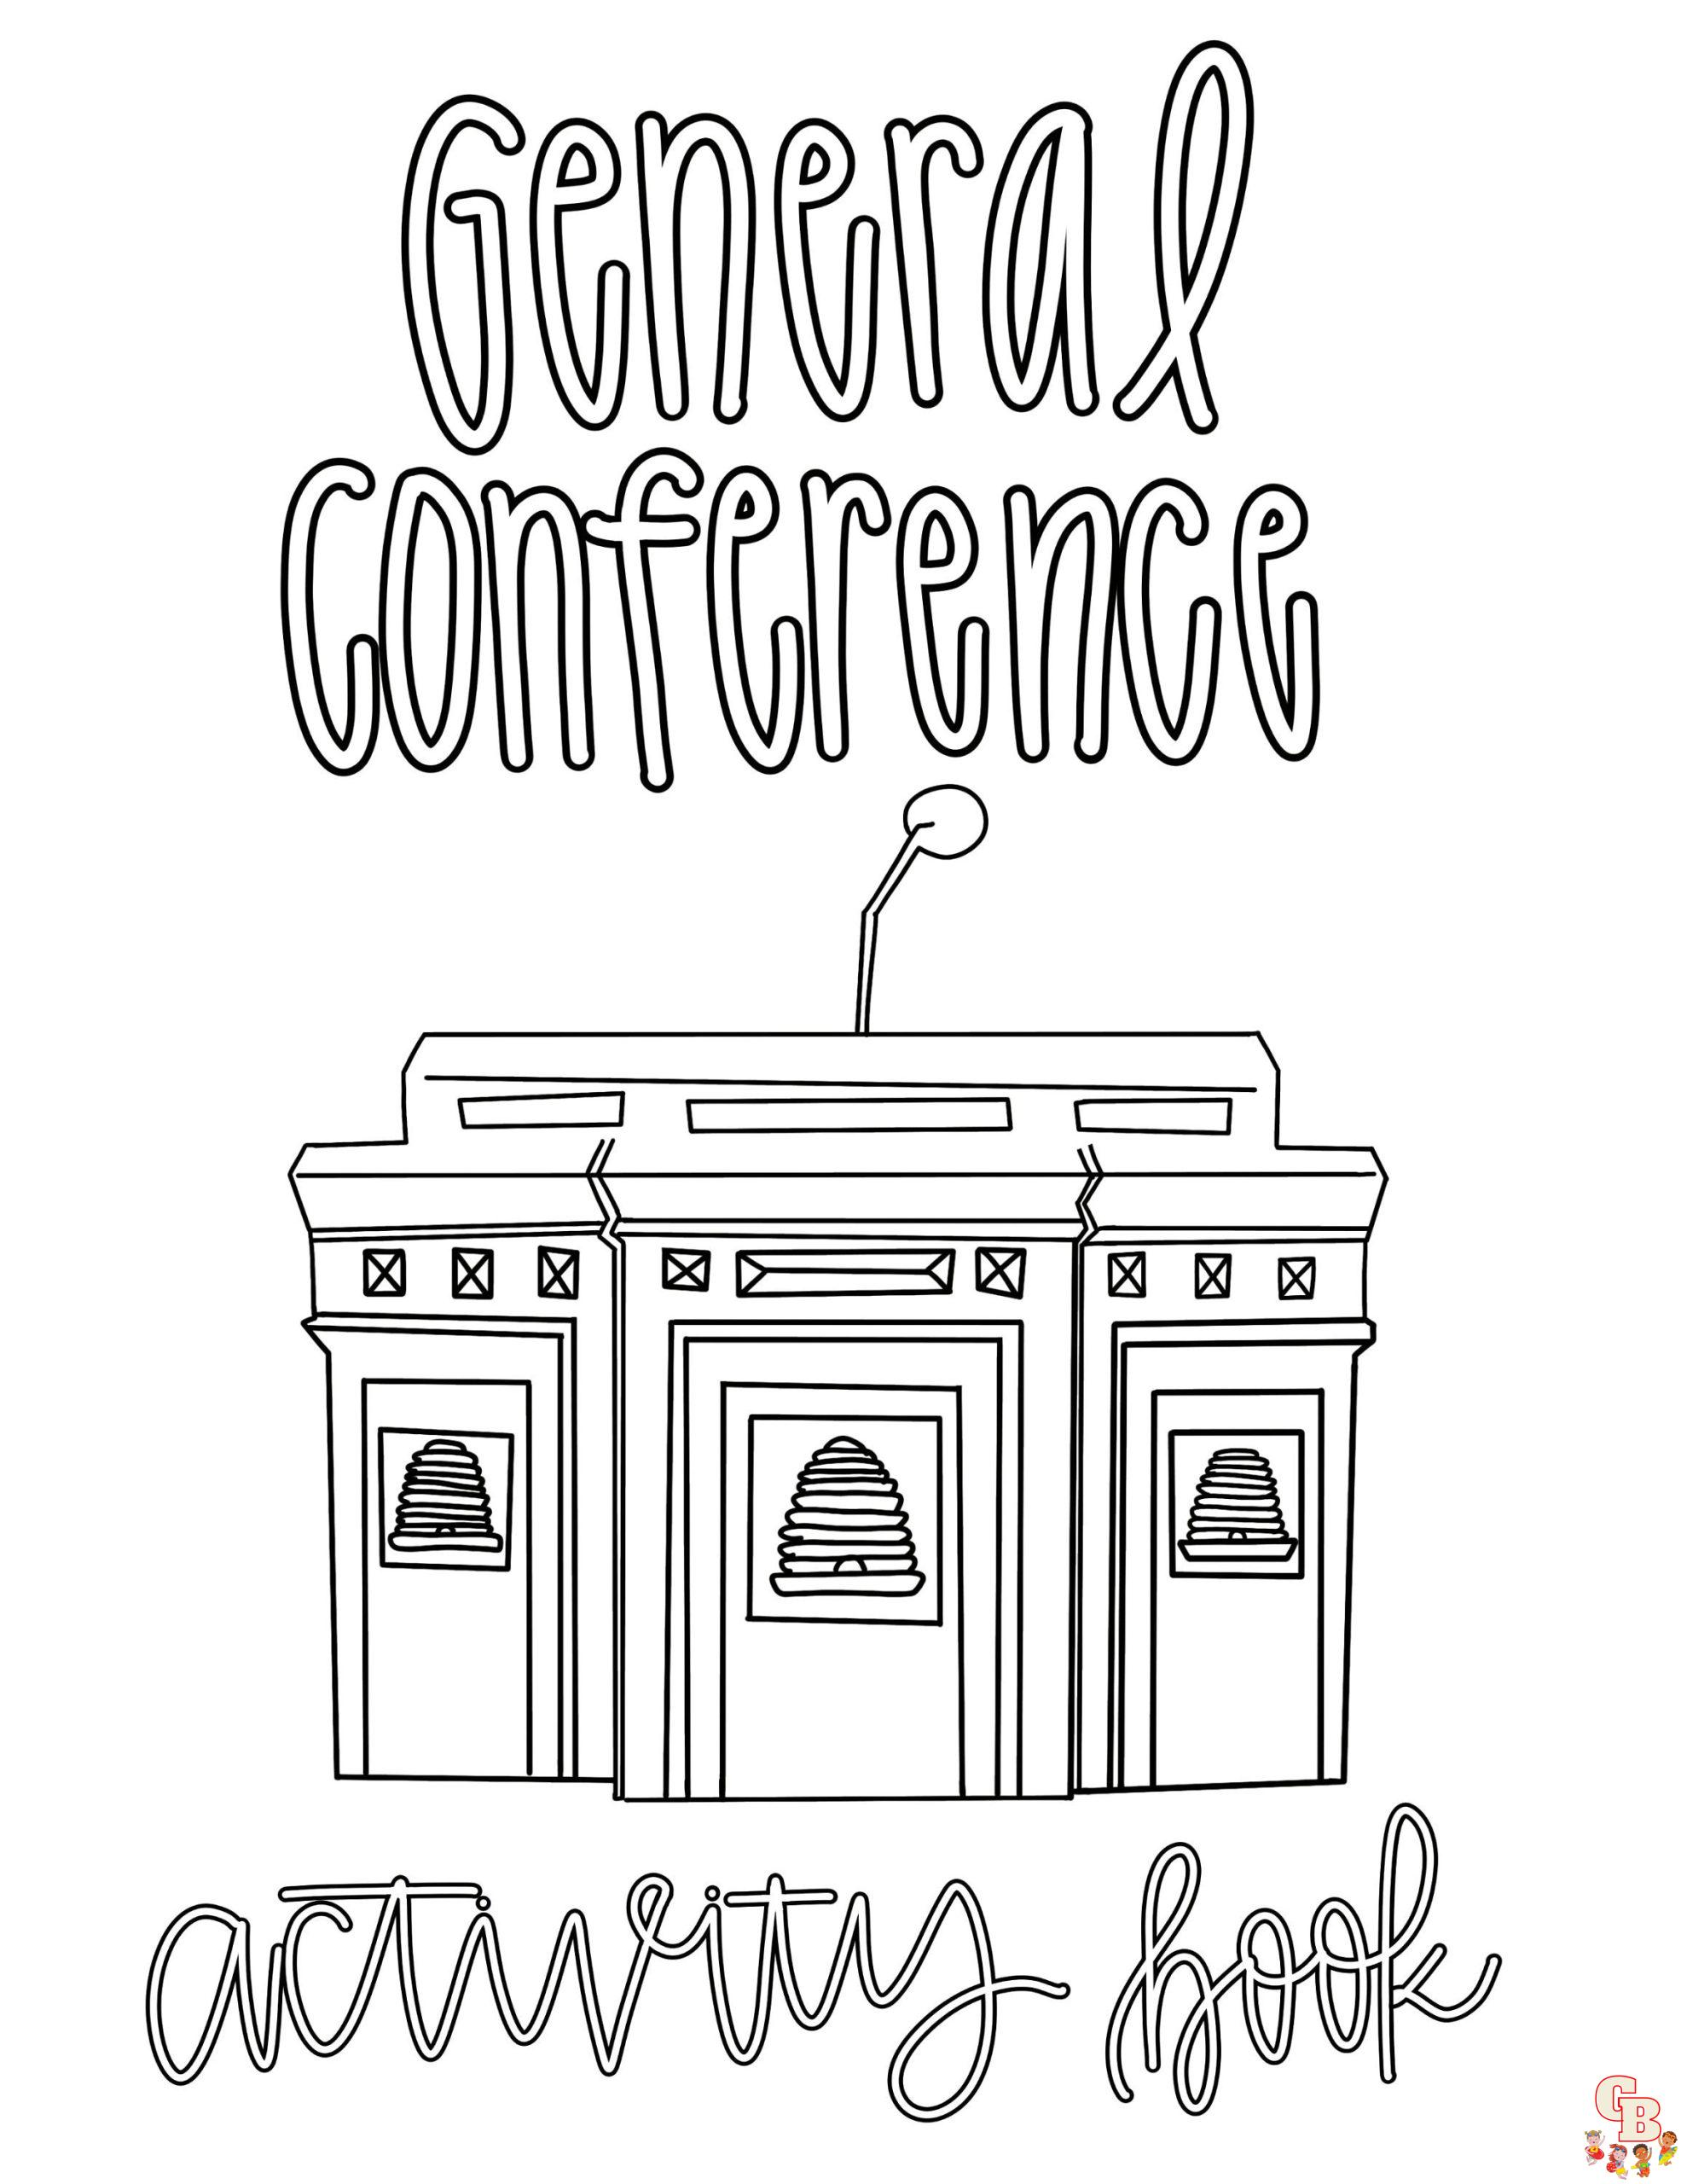 Fun And Free General Conference Coloring Pages For Kids